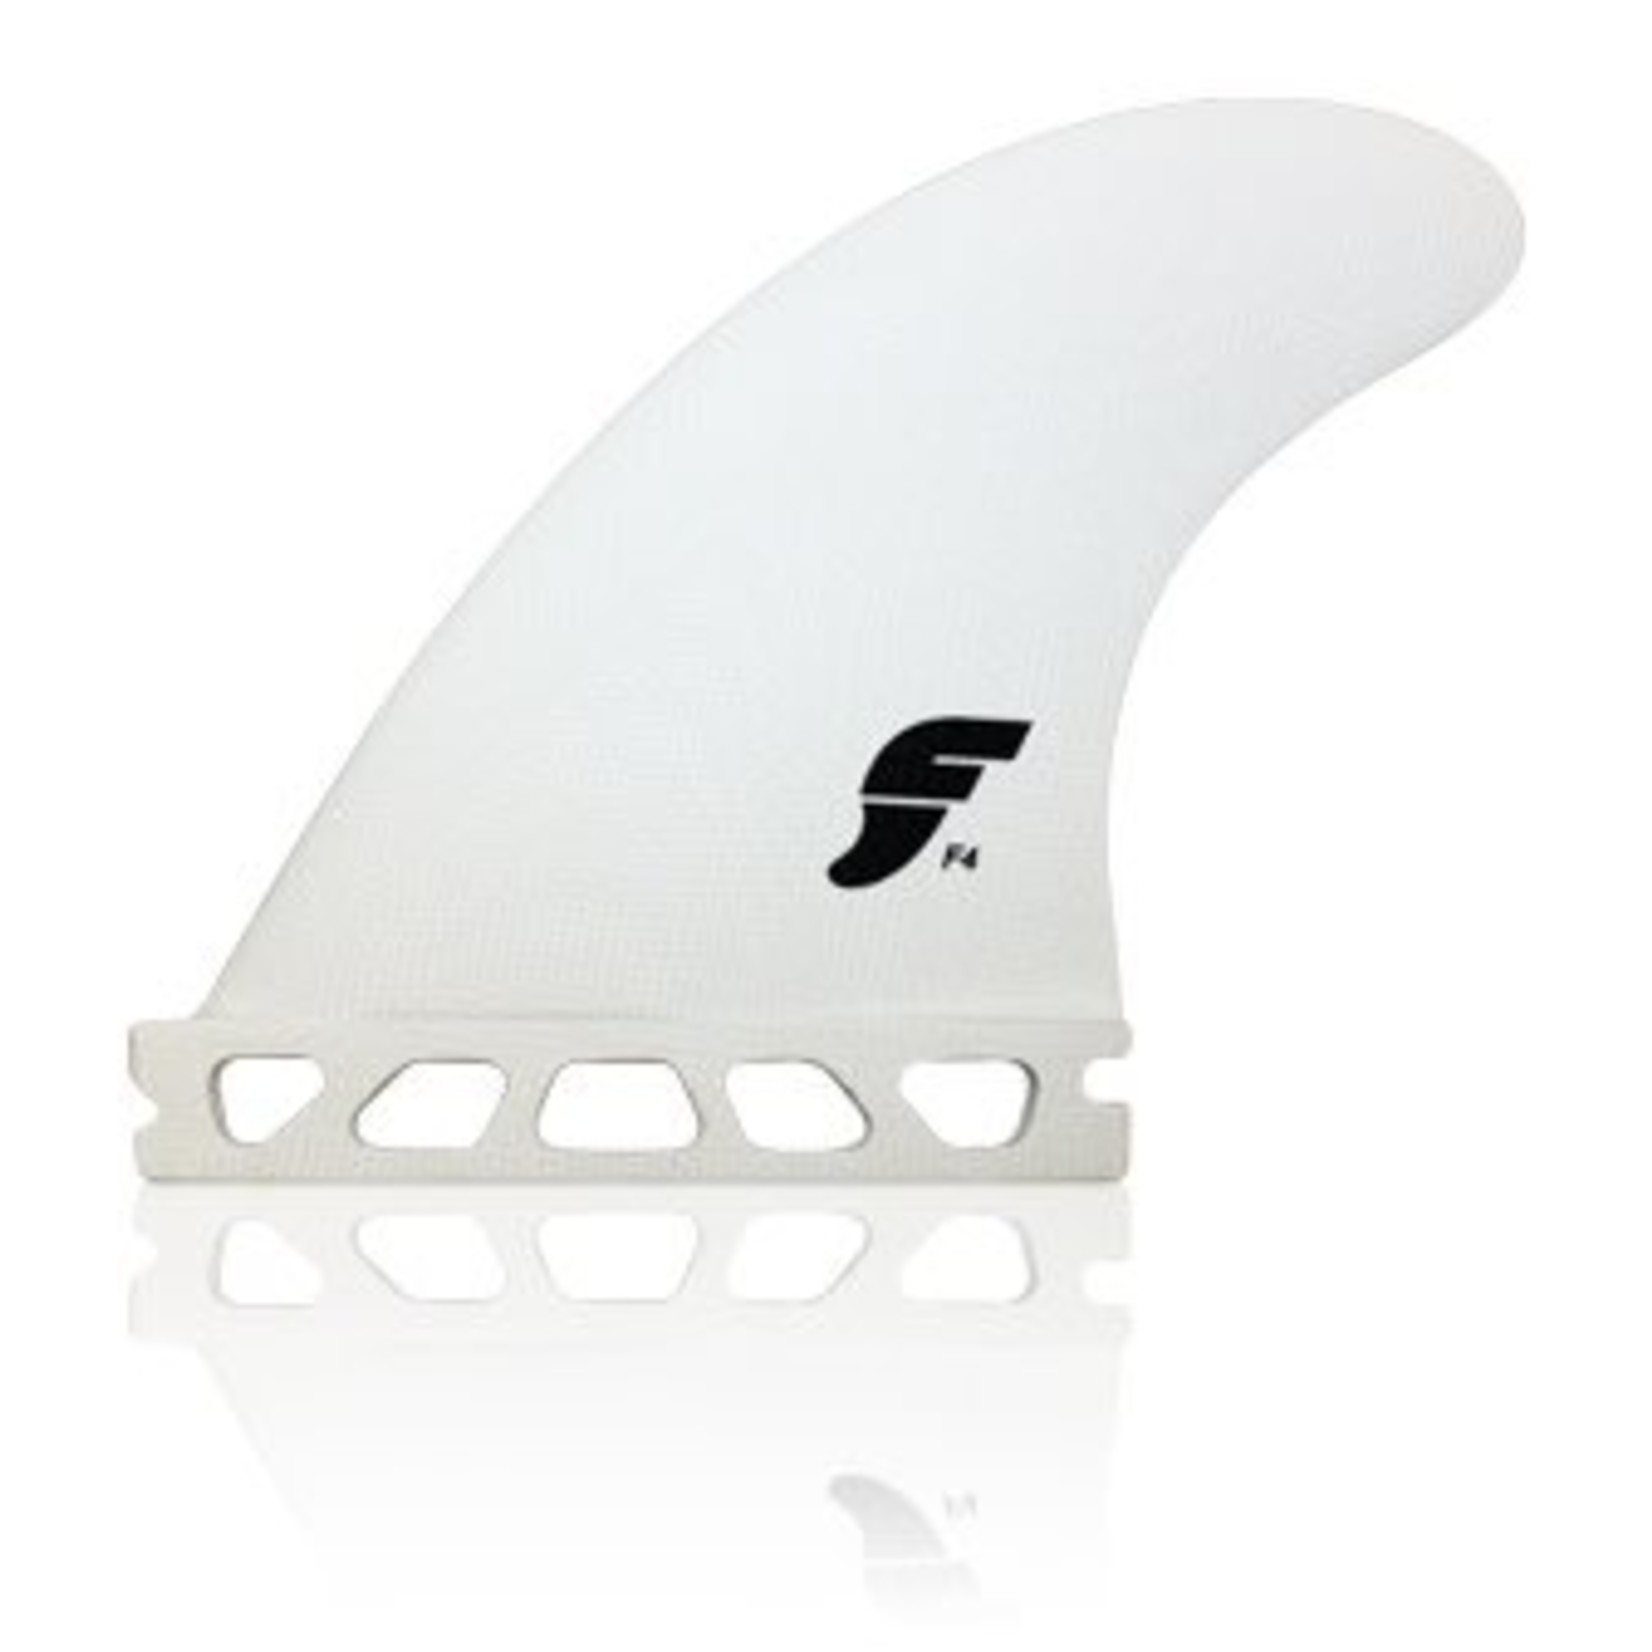 Futures Futures 1-tab  thermotech thruster fins